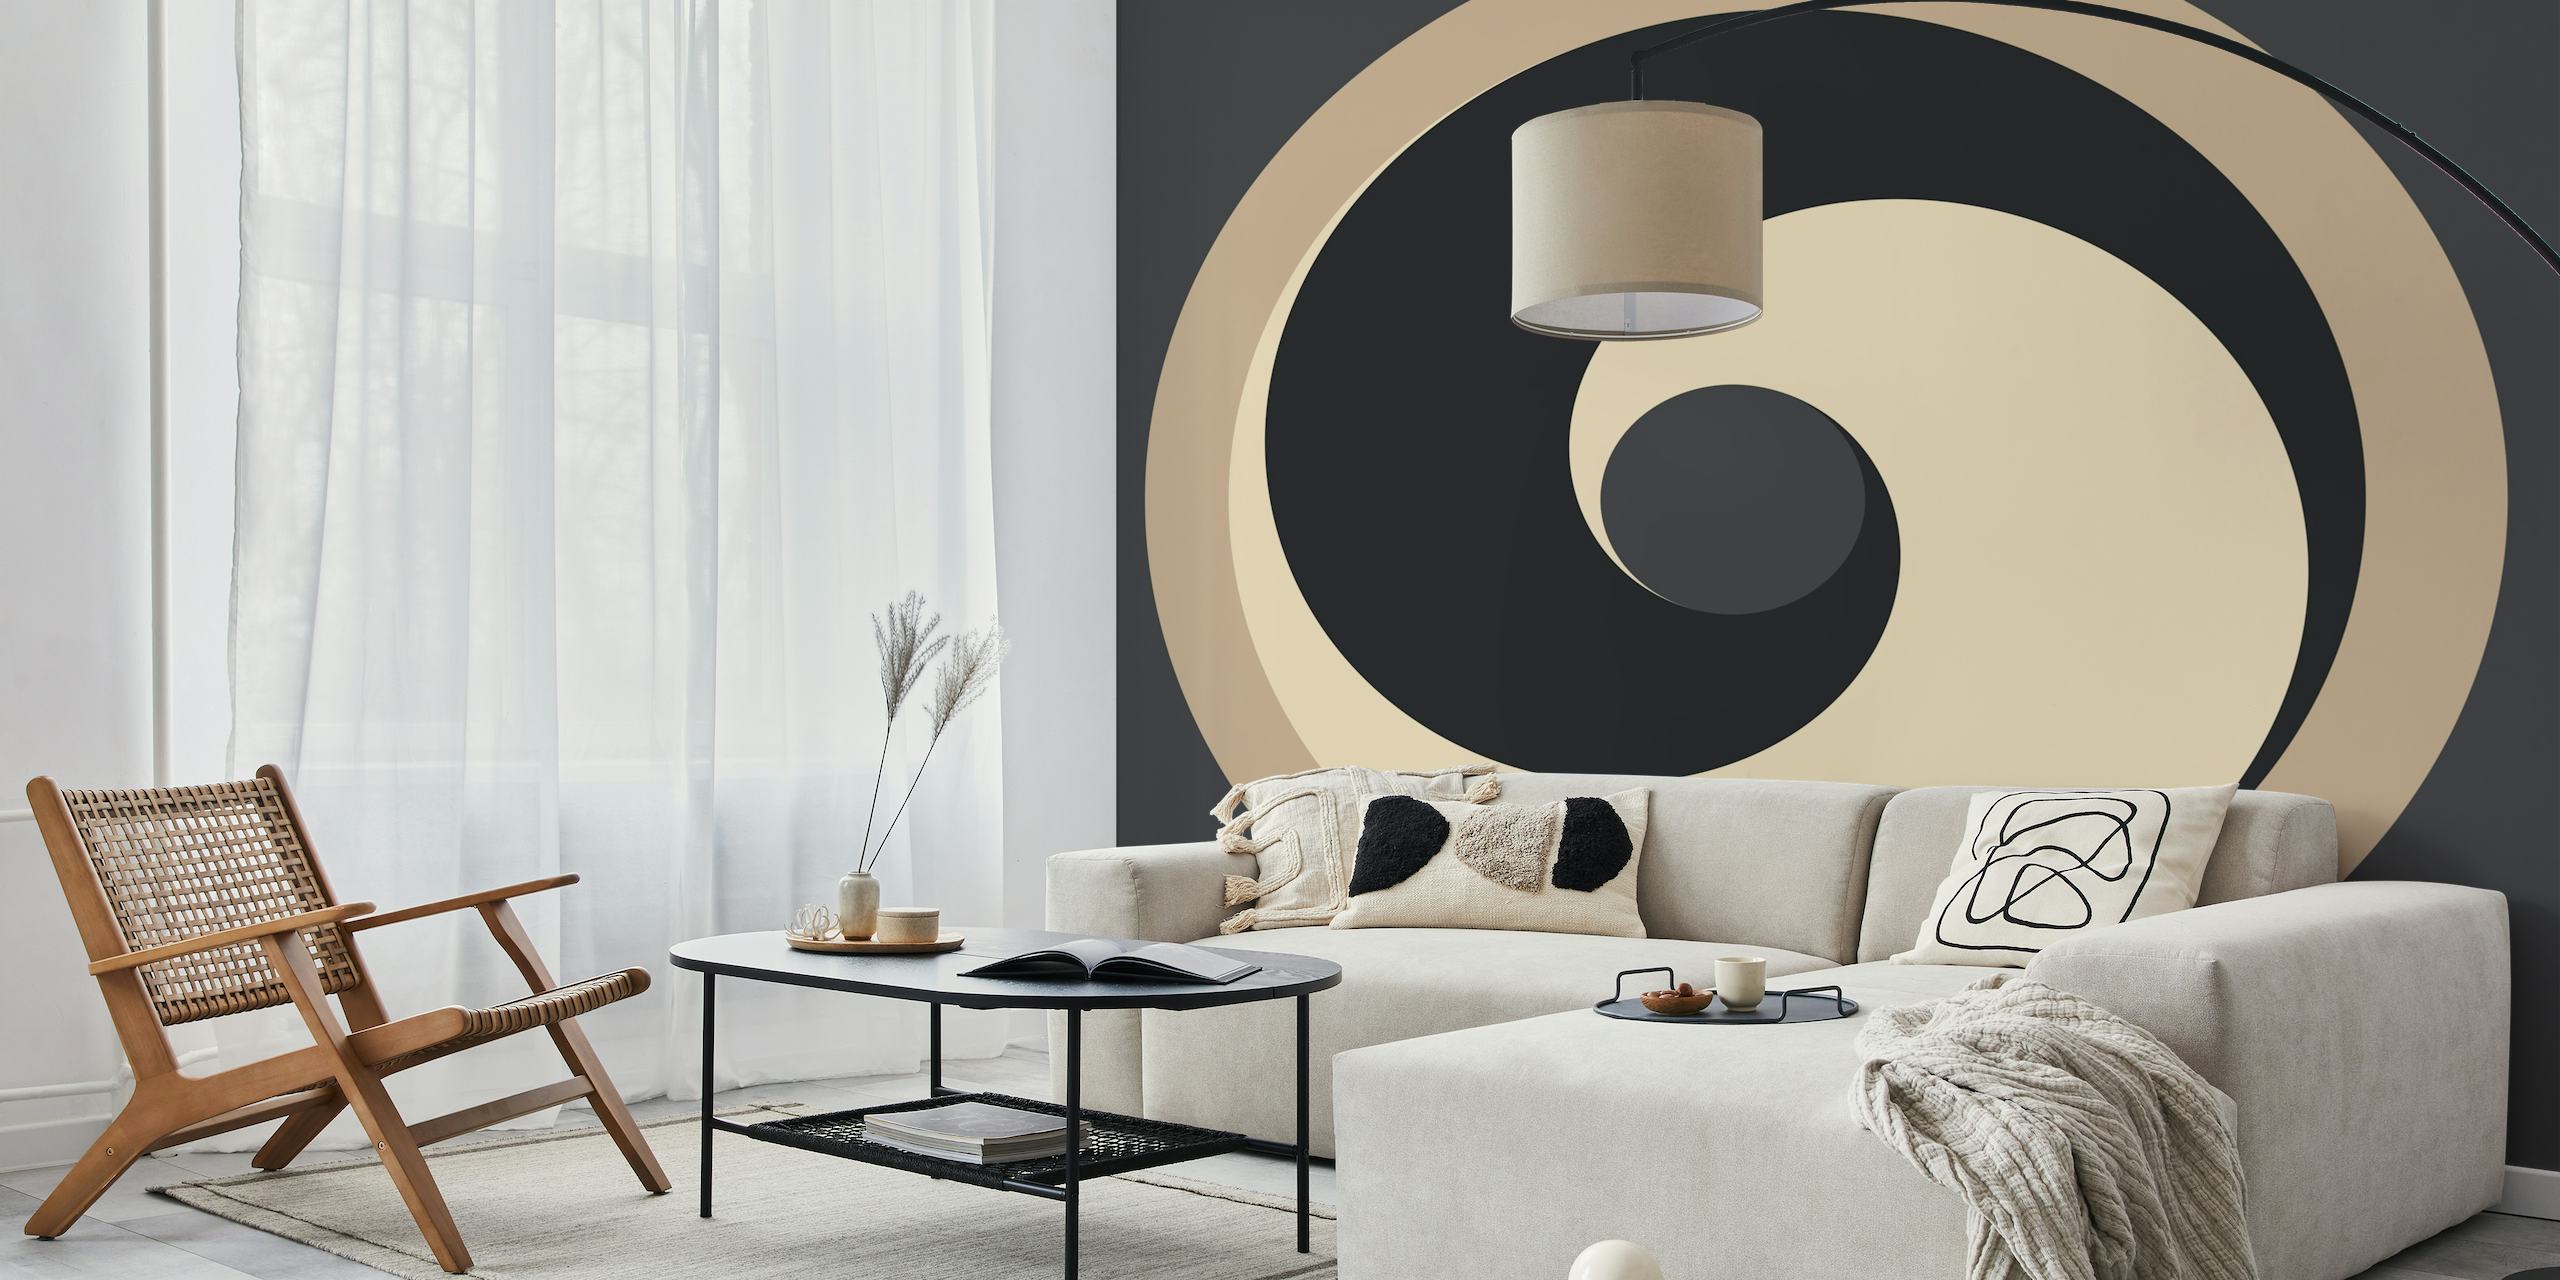 Abstract wall mural with Japanese-inspired design featuring swirl patterns in monochromatic tones.